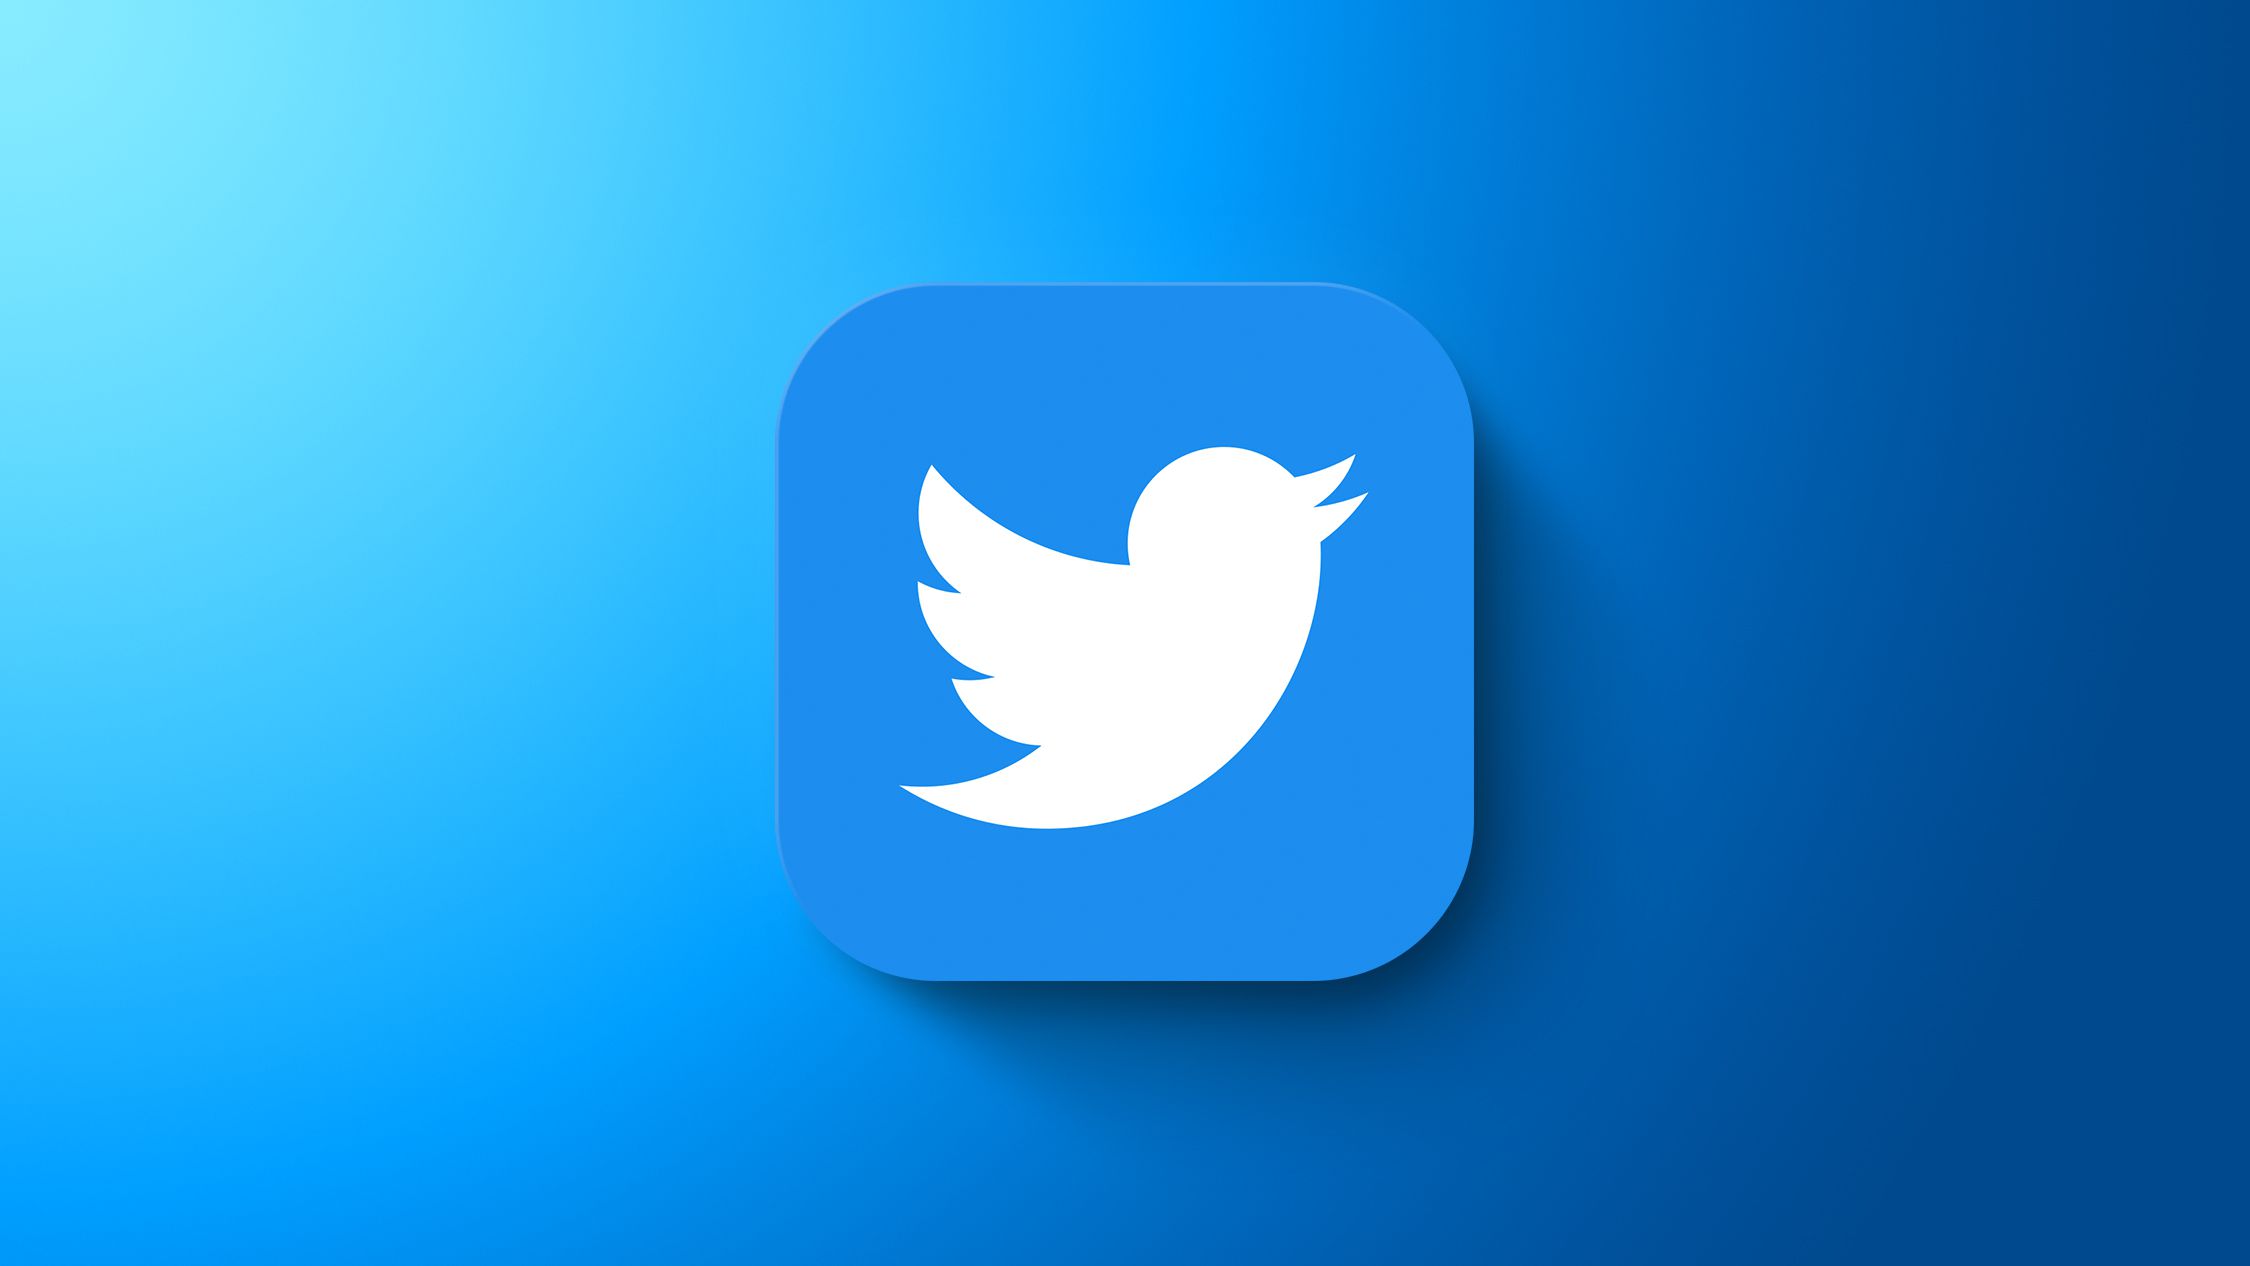 twitter-is-down-right-now-and-not-letting-users-tweet-update